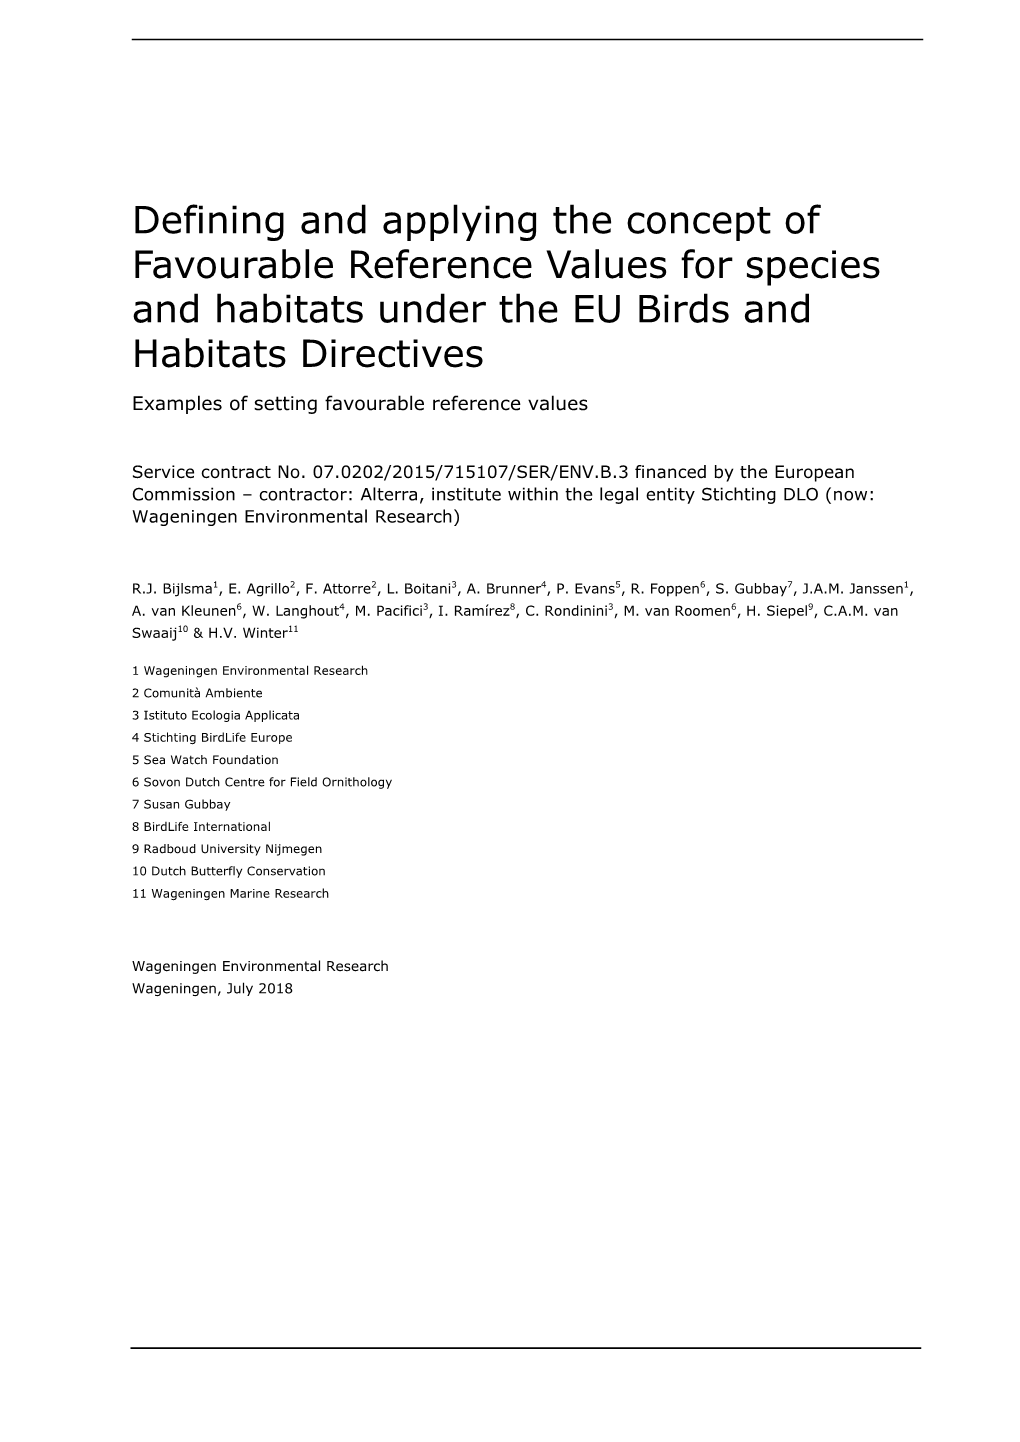 Defining and Applying the Concept of Favourable Reference Values for Species and Habitats Under the EU Birds and Habitats Directives